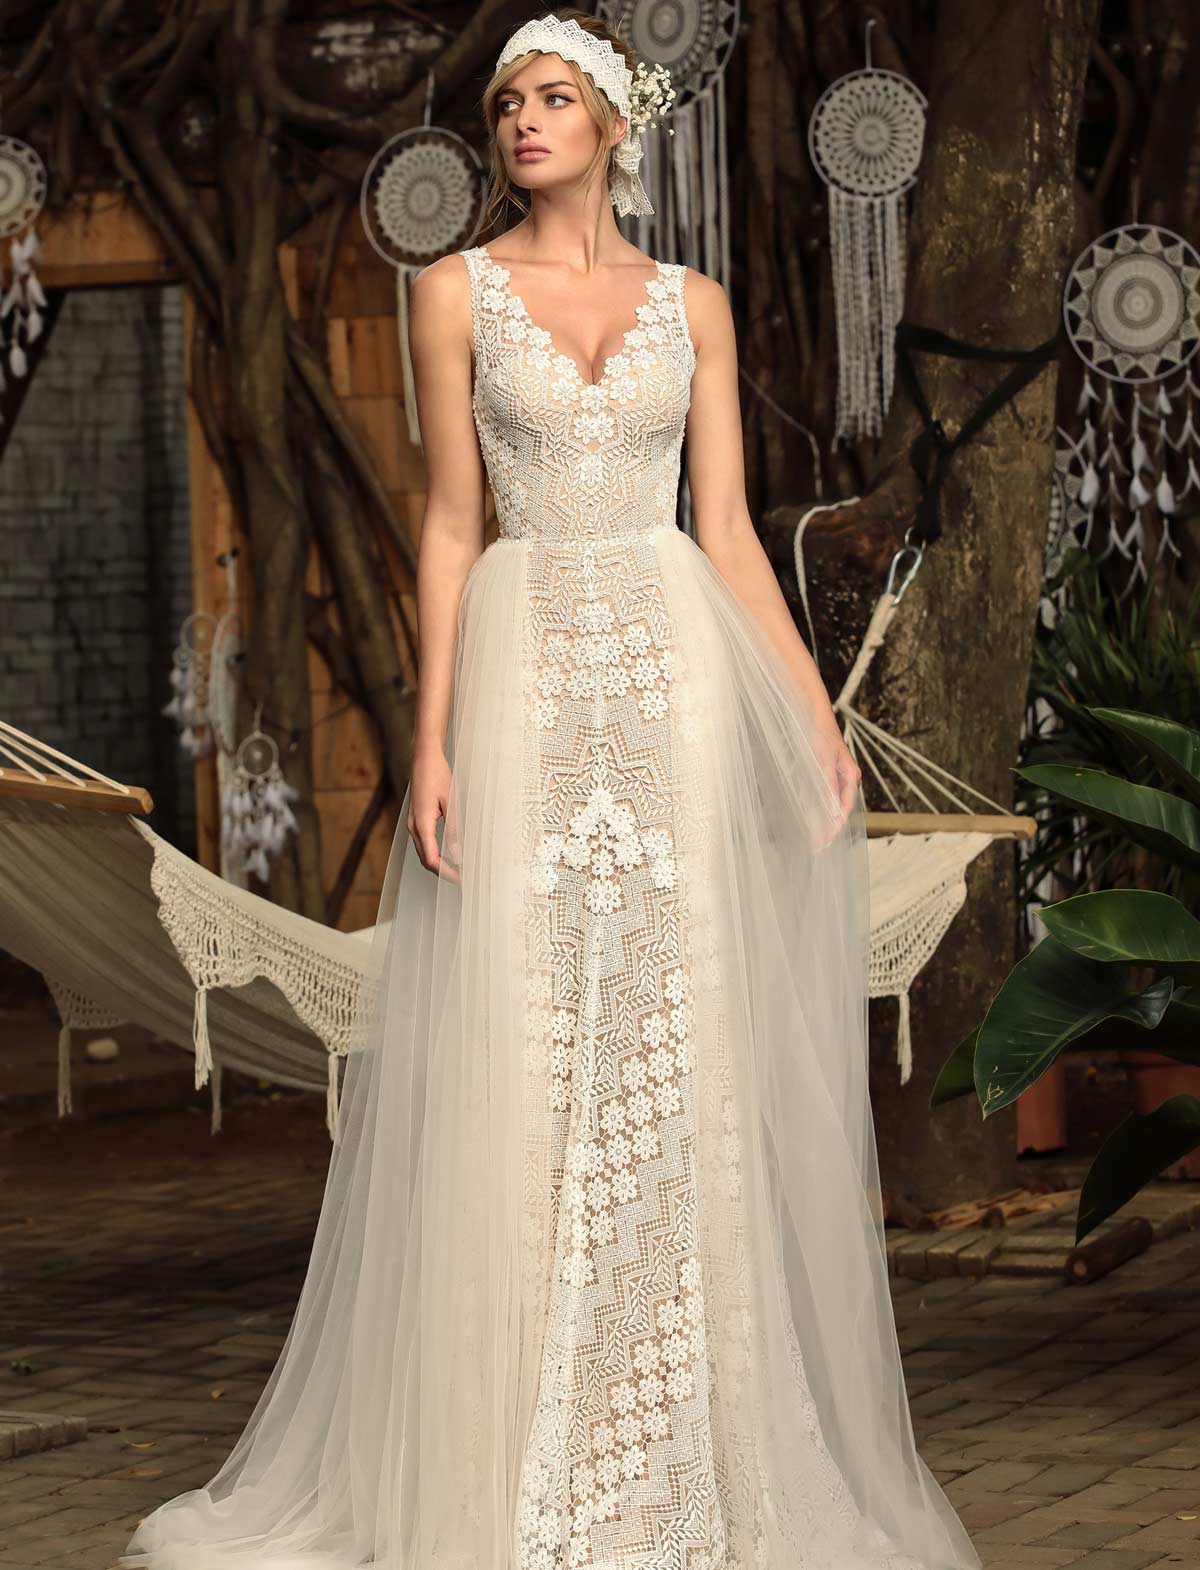 wedding dresses for italy